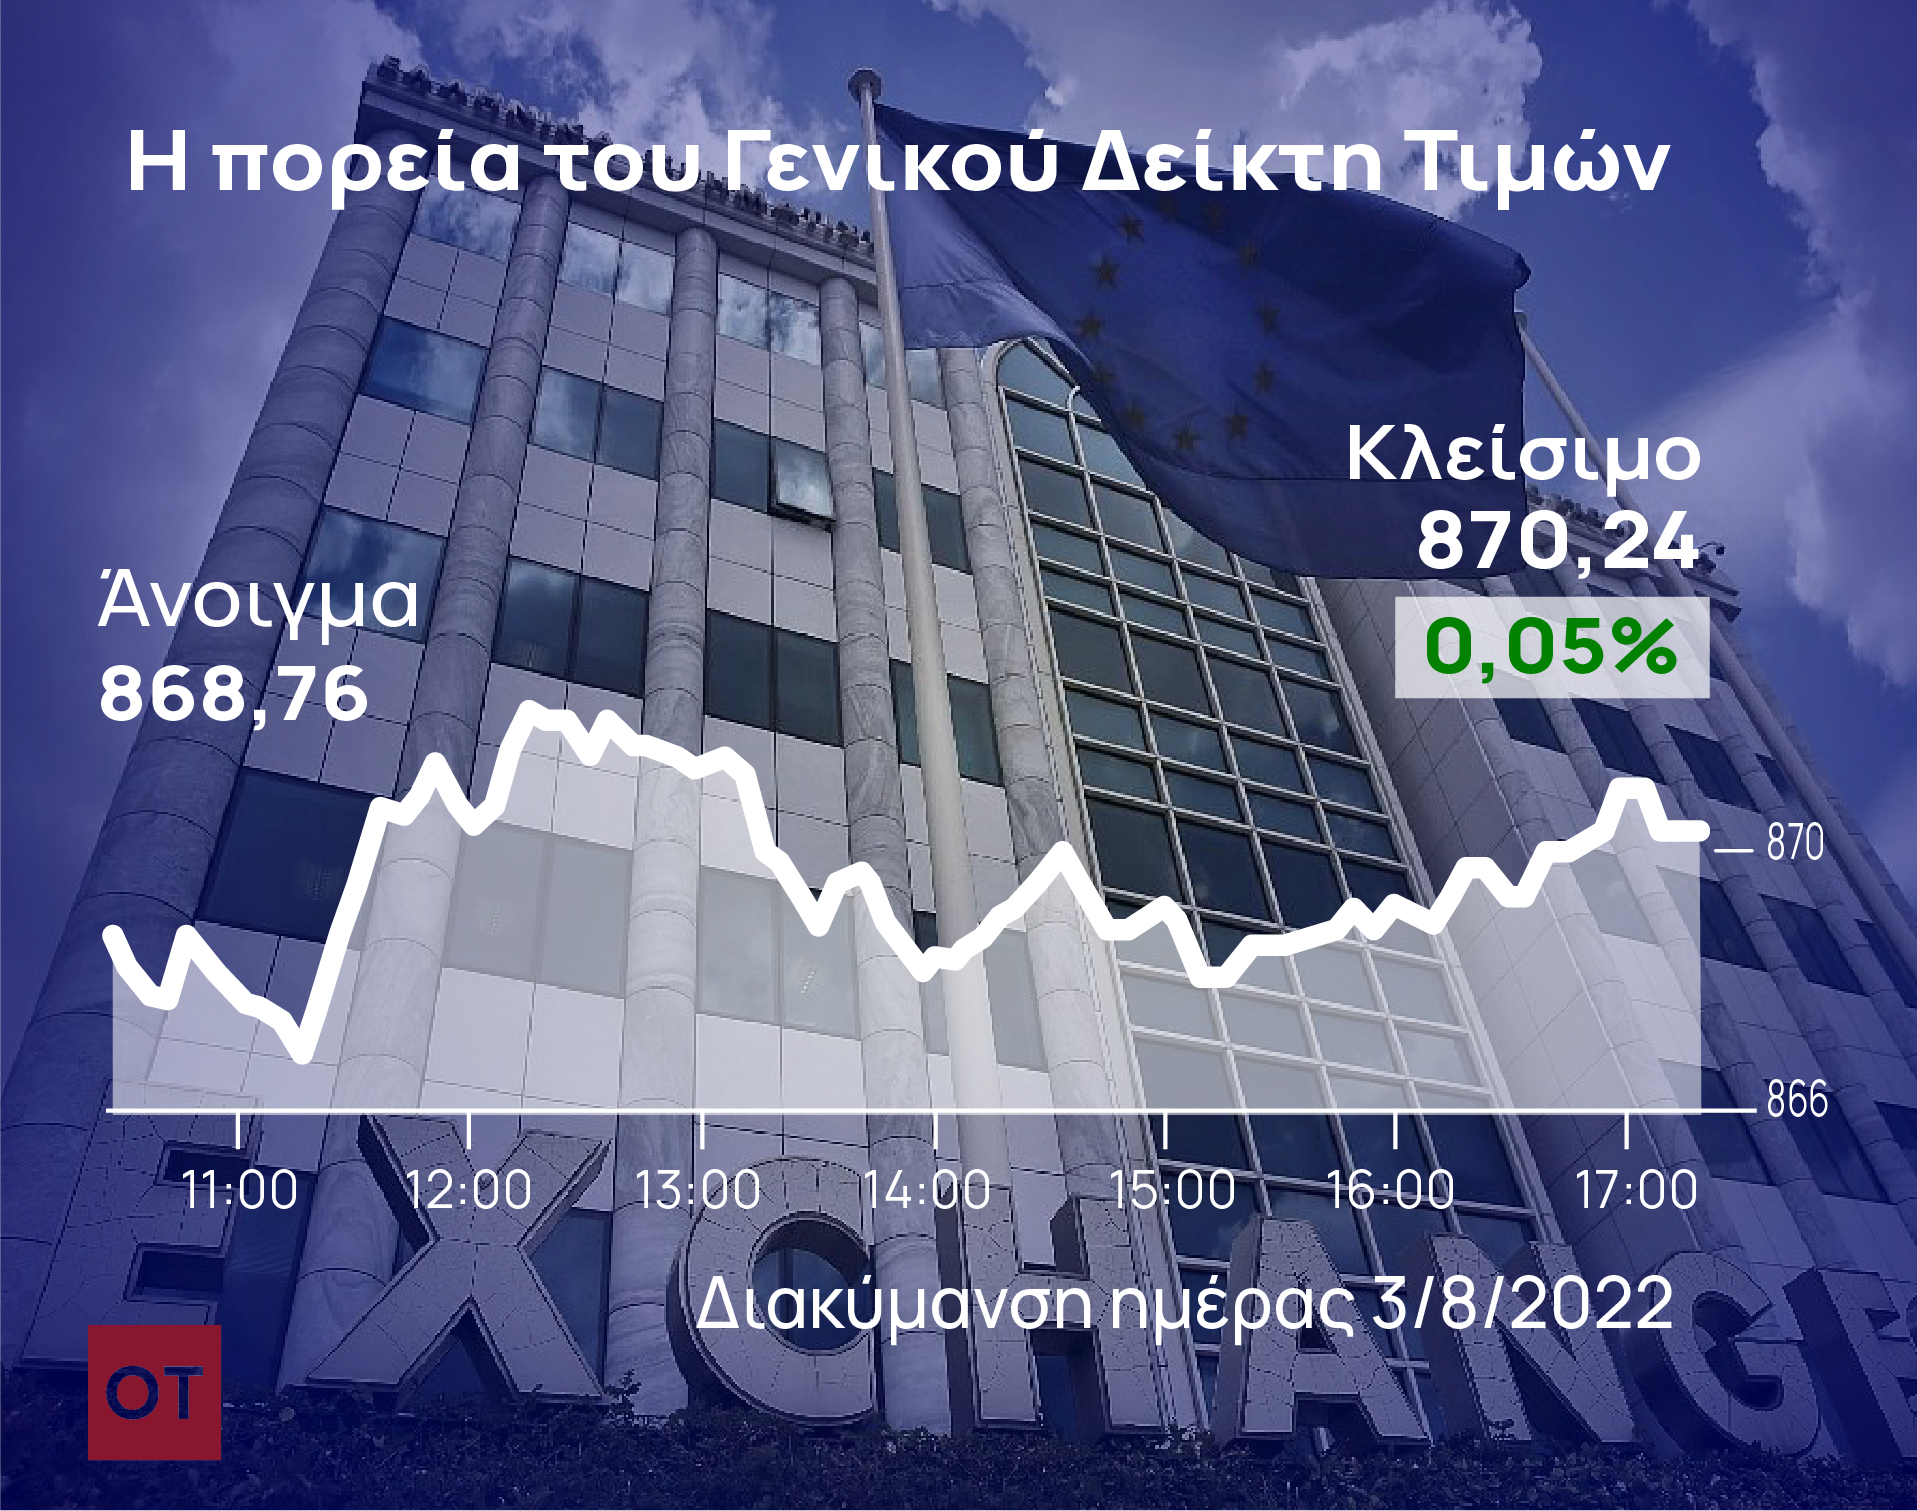 Athens Stock Exchange (ASE) withstands pressure on Wed. to remain above 870-mark